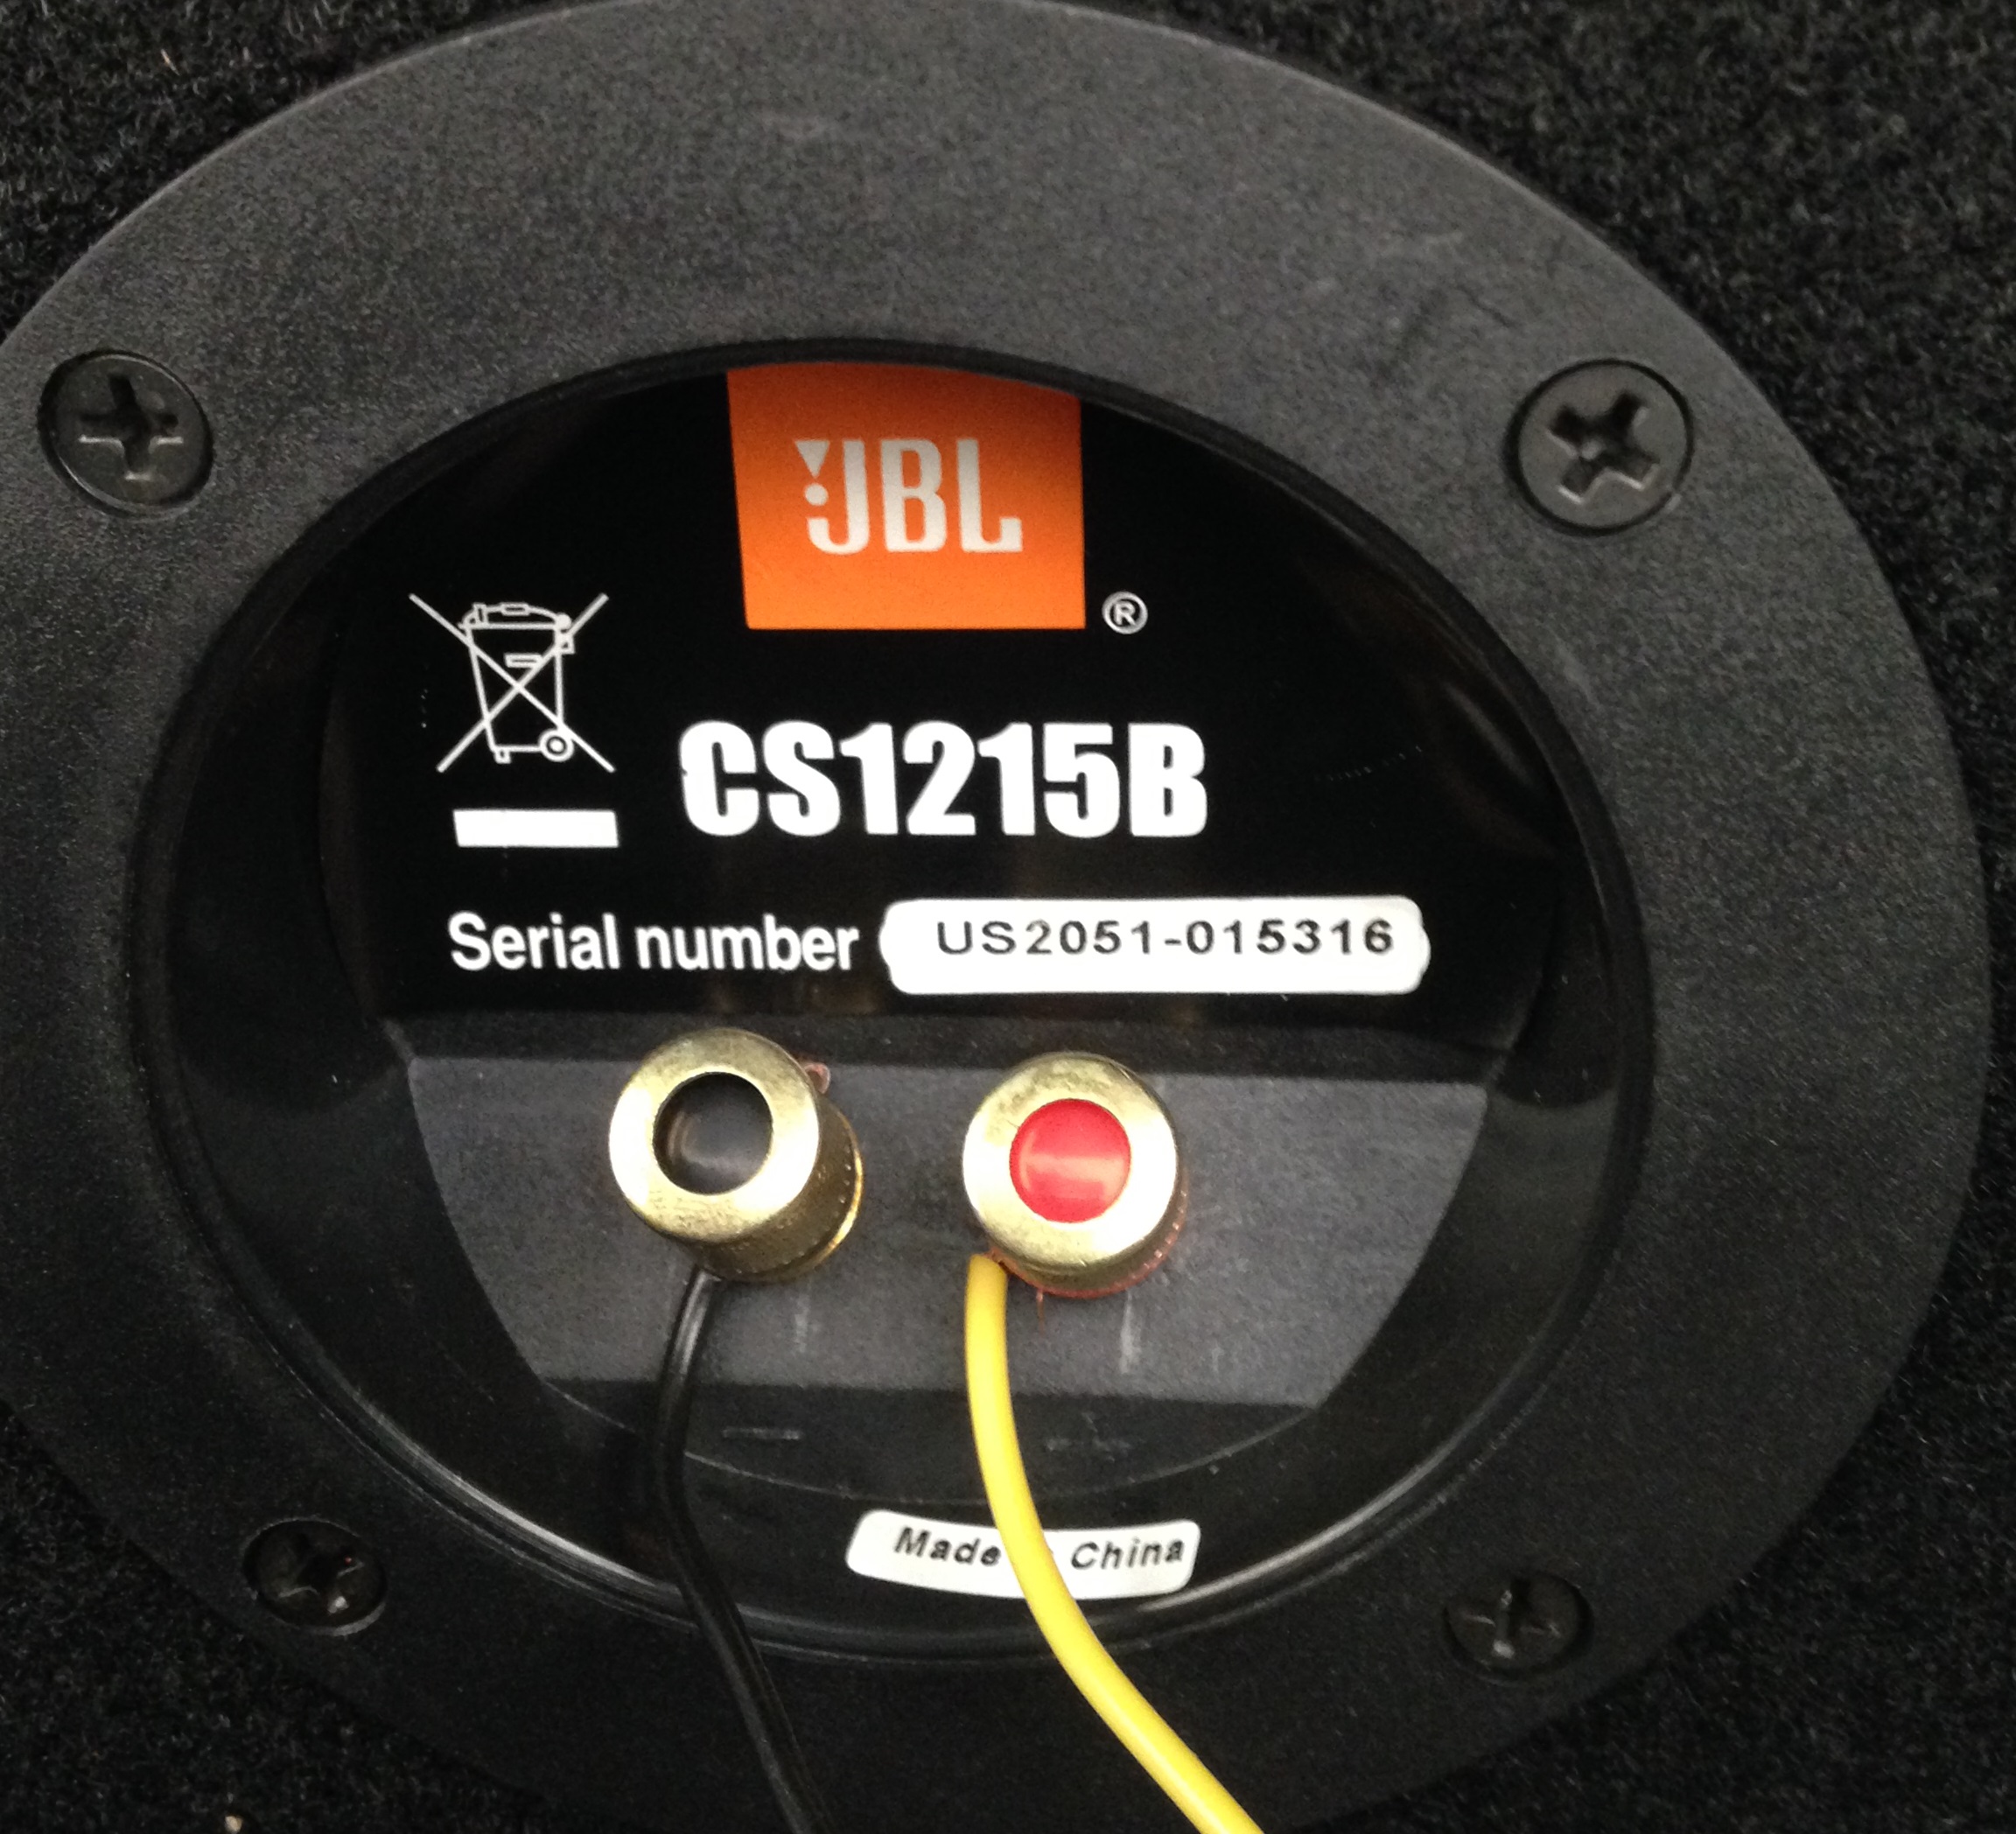 Where is the serial number on my jbl?